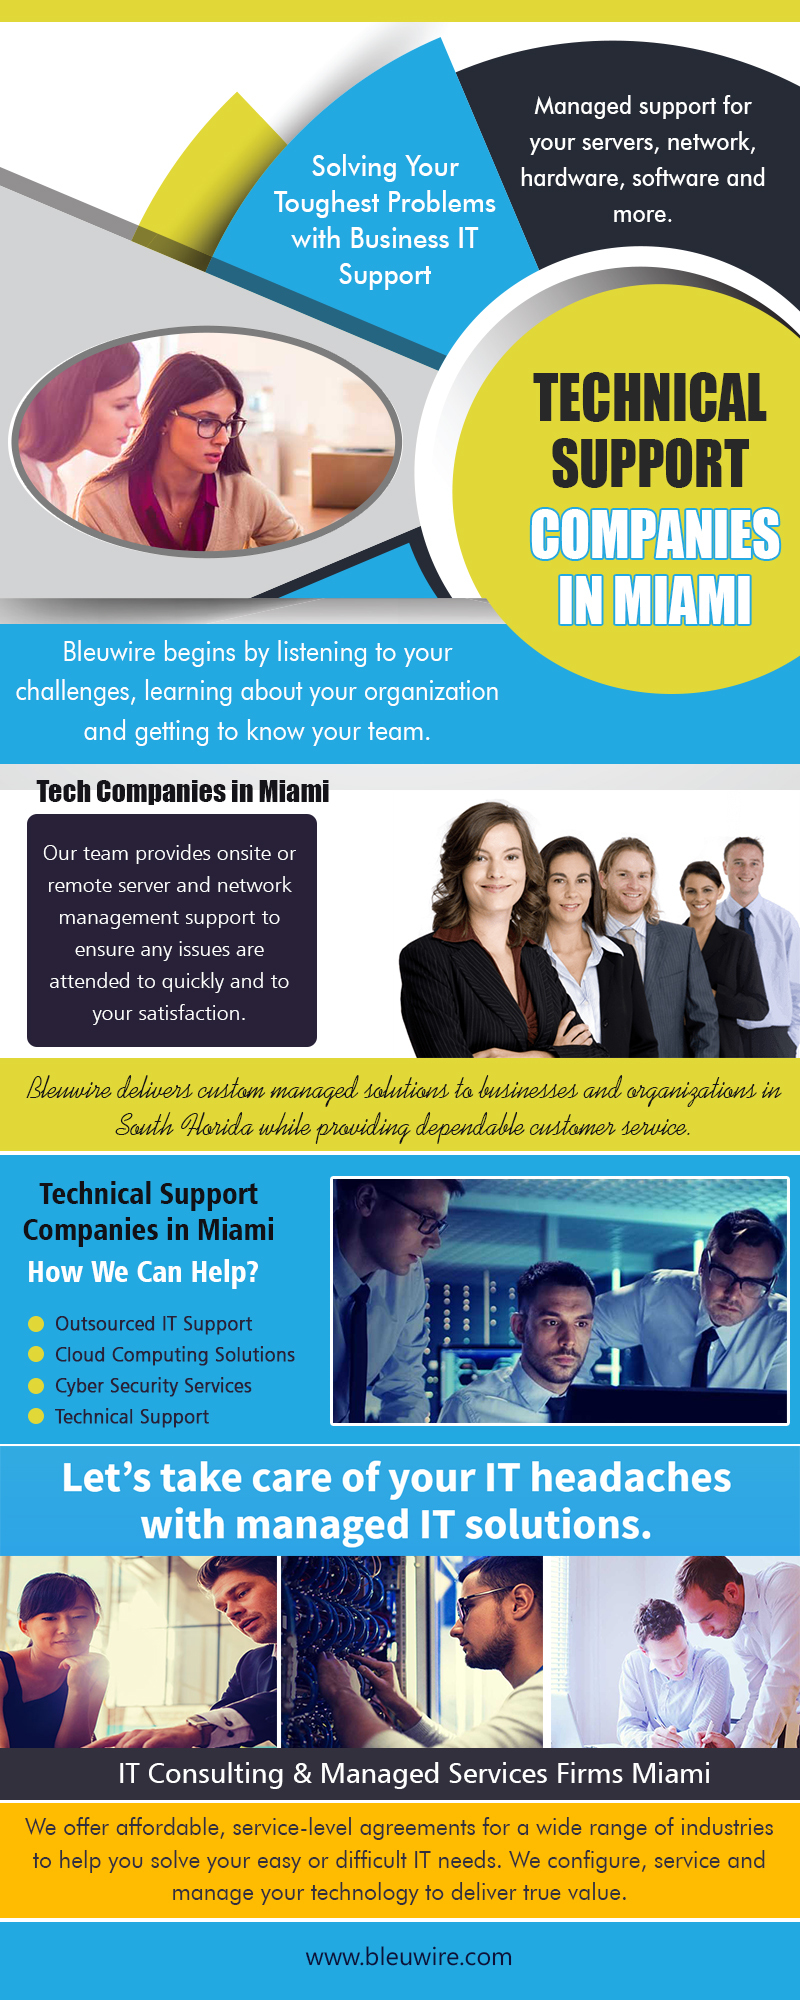 Technical Support Companies in Miami